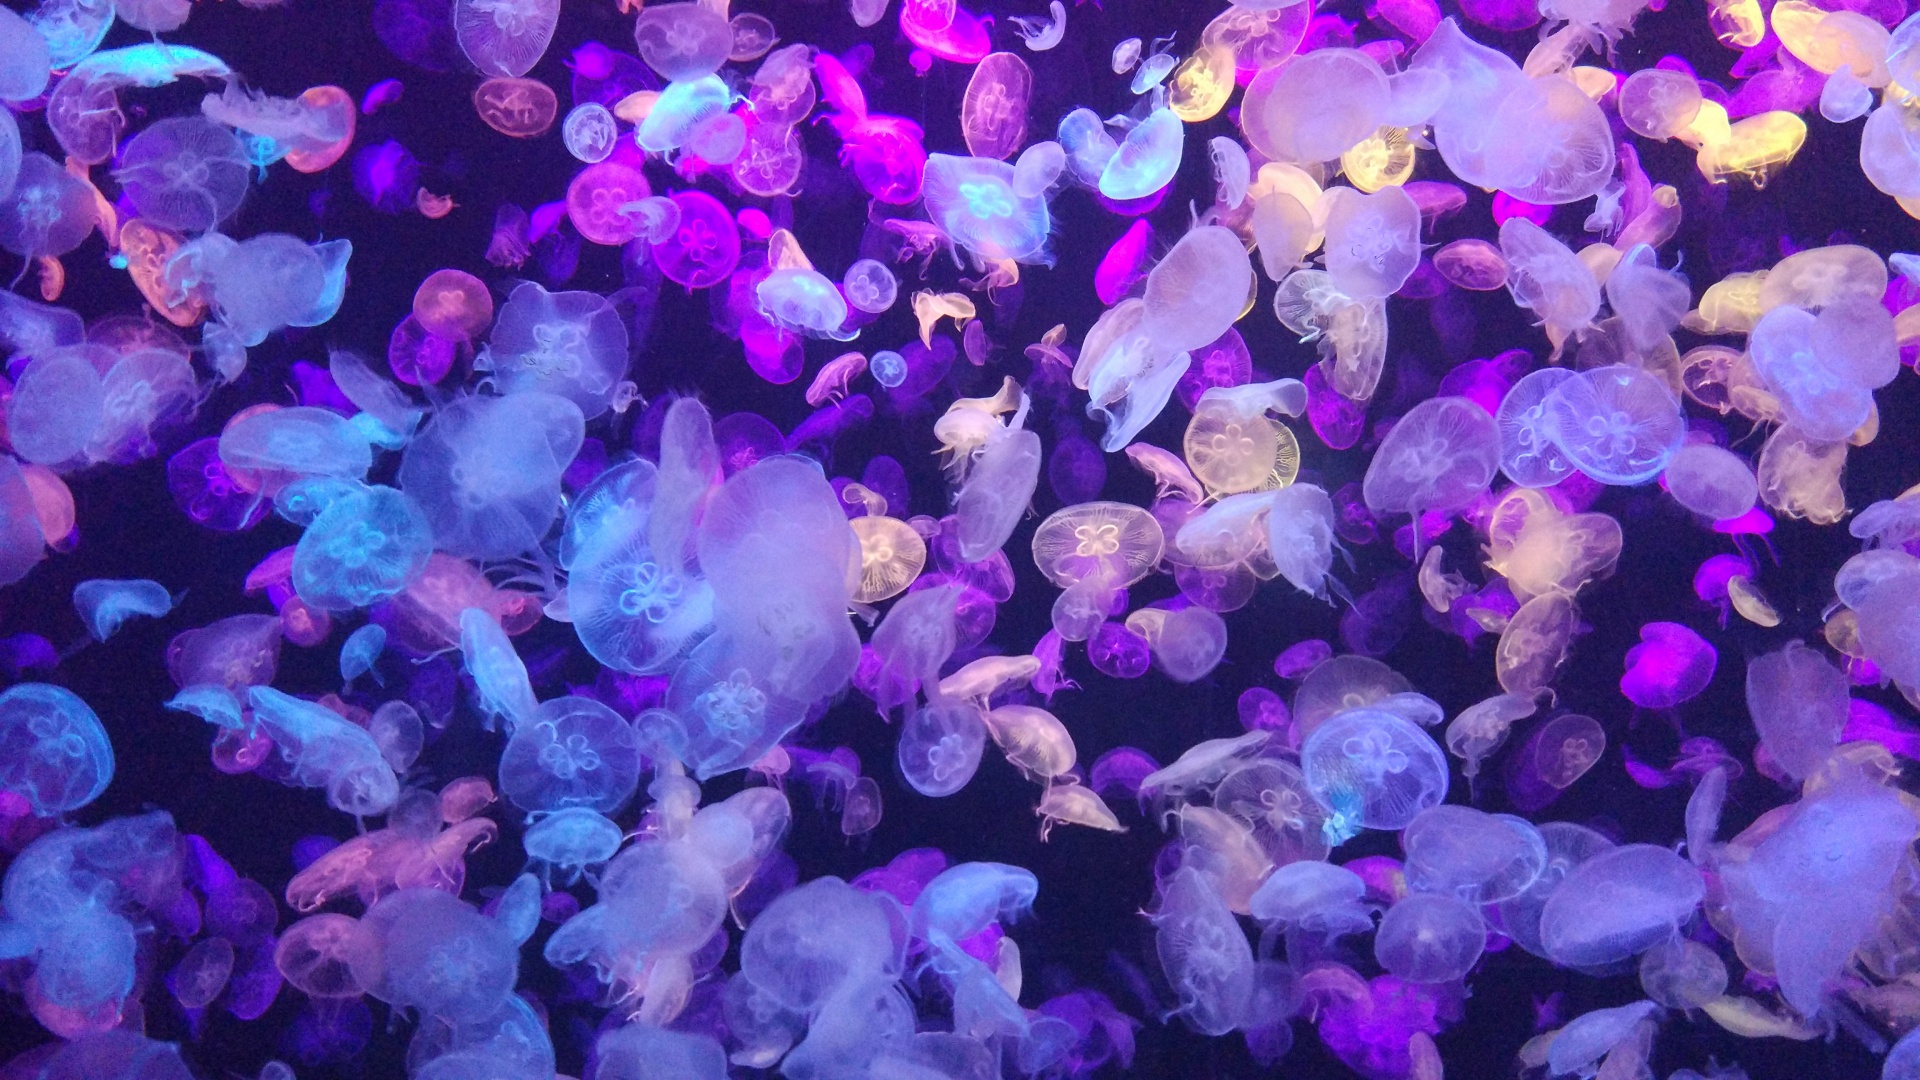 Purple and White Jelly Fish. Wallpaper in 1920x1080 Resolution